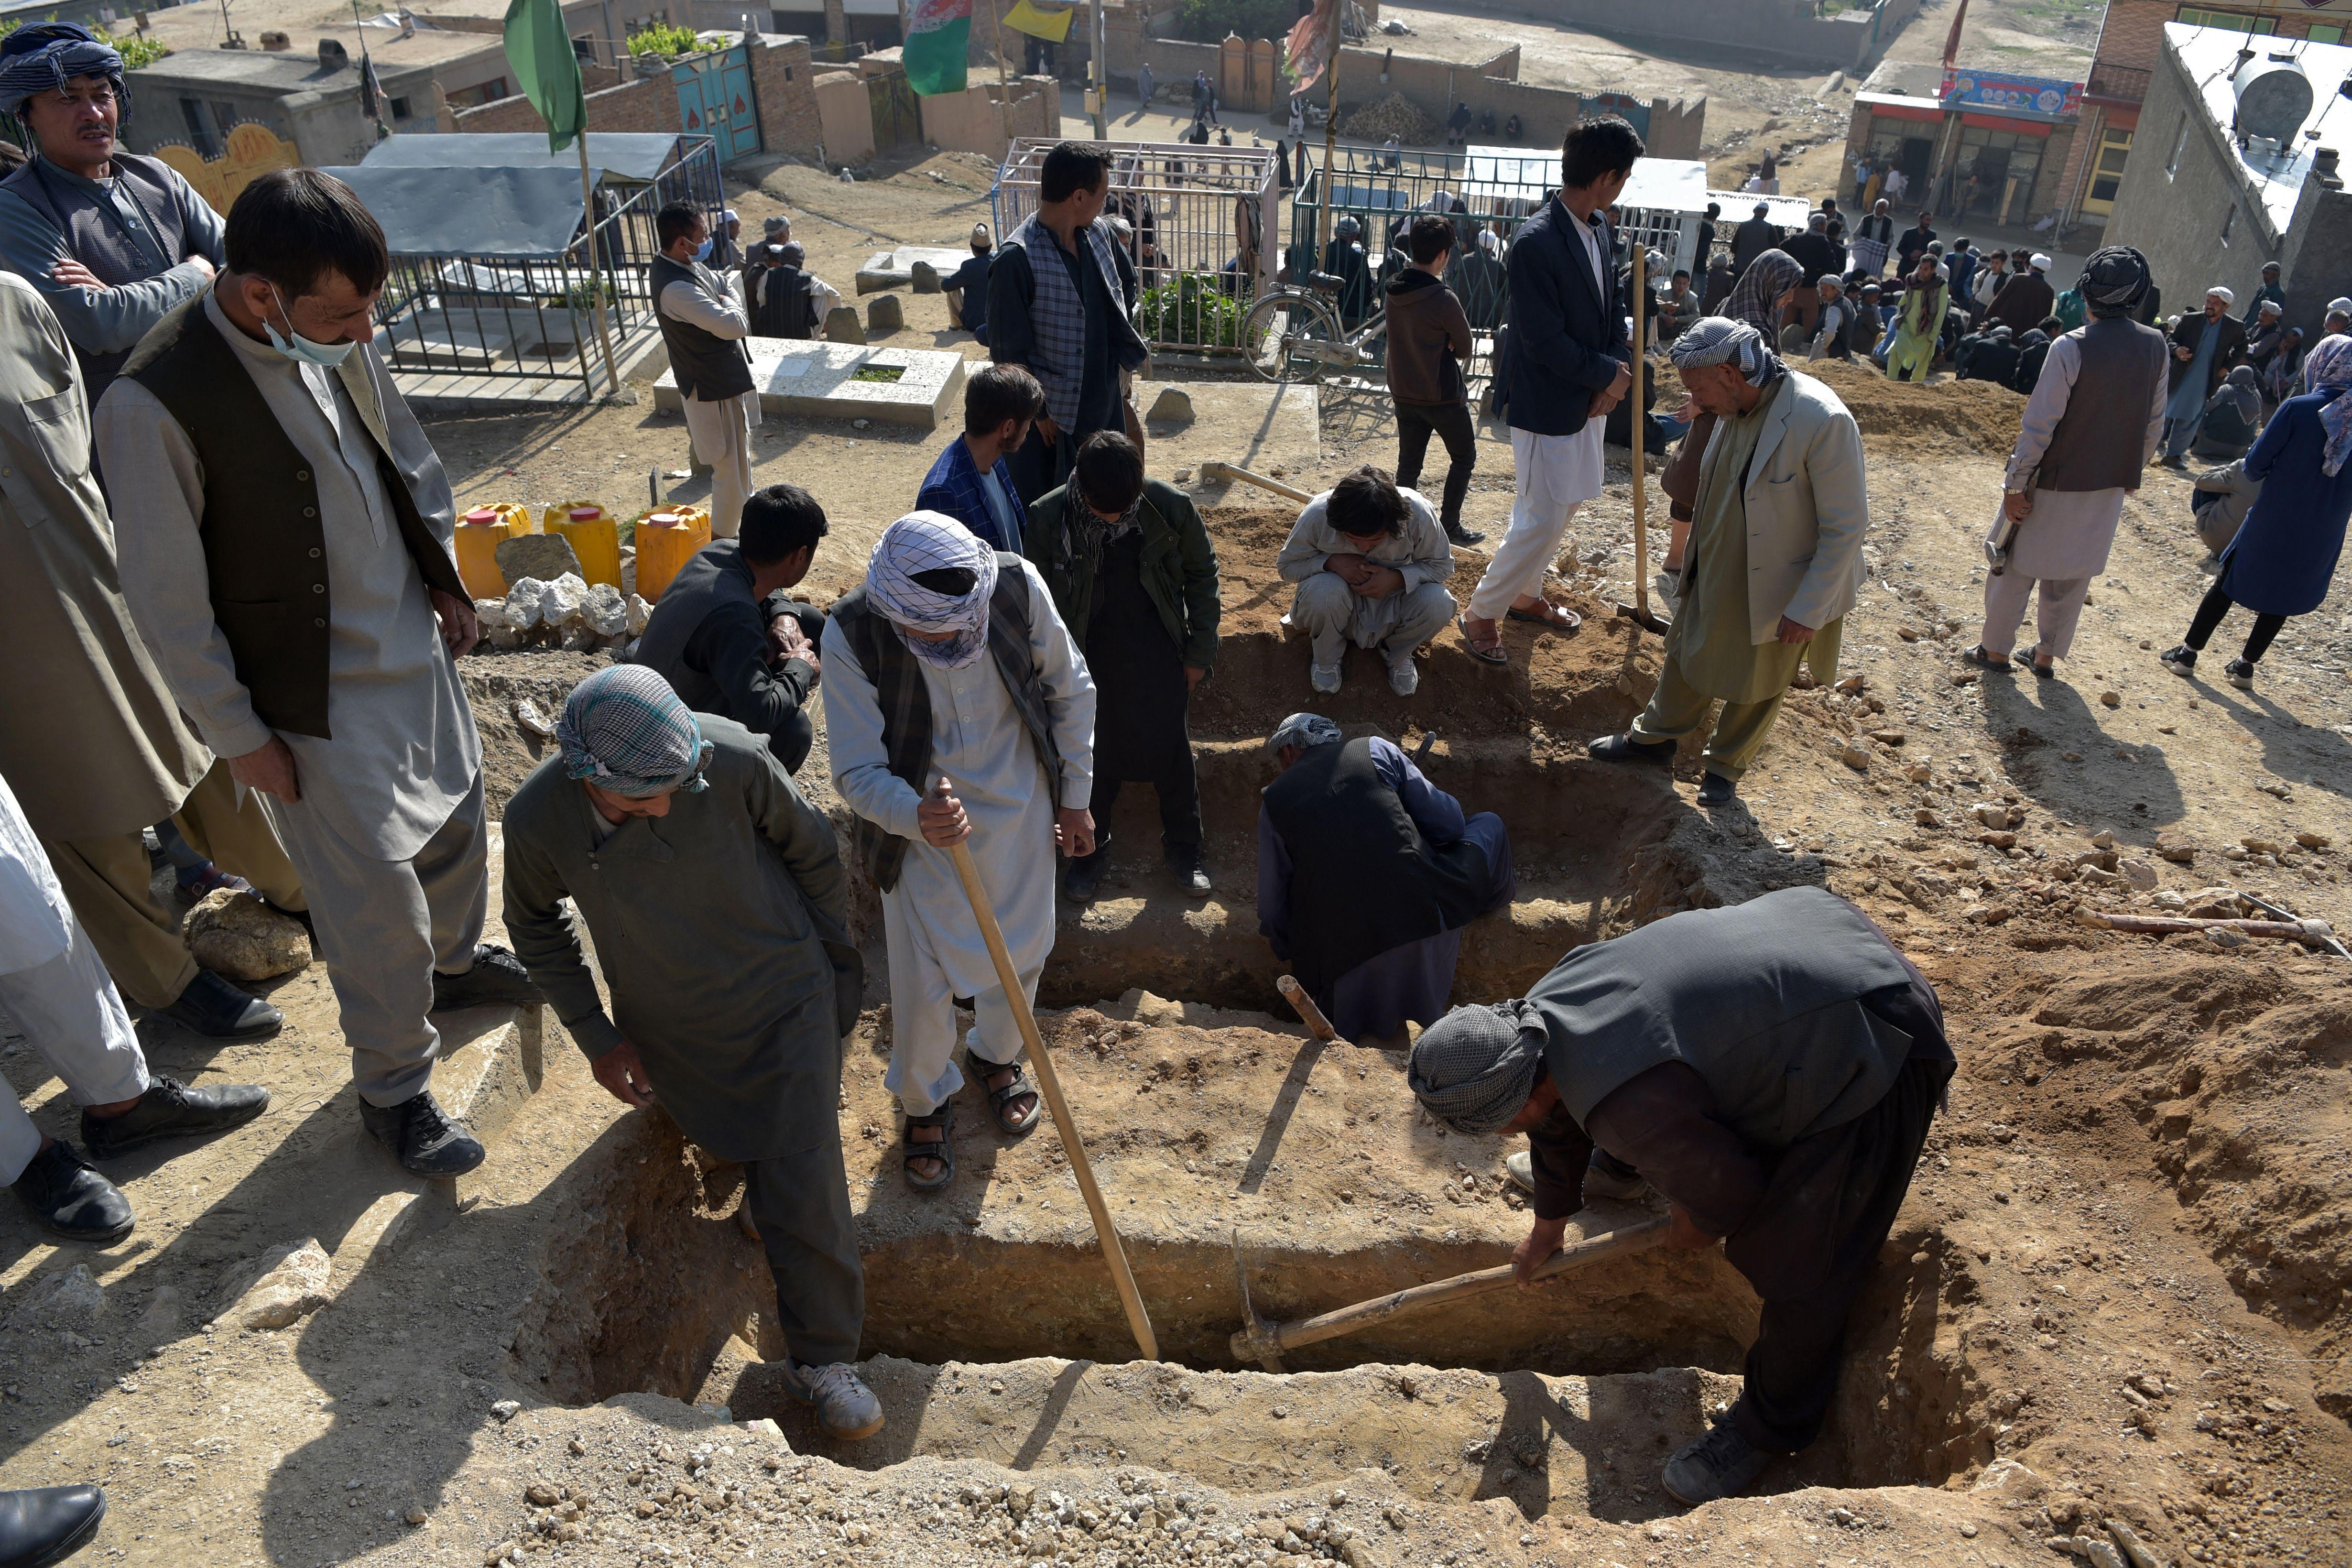 Shiite mourners and relatives dig graves for girls, who died in yesterday's multiple blasts outside a girls' school, during the burial at a desolate hilltop cemetery in Dasht-e-Barchi on the outskirts of Kabul on May 9, 2021.